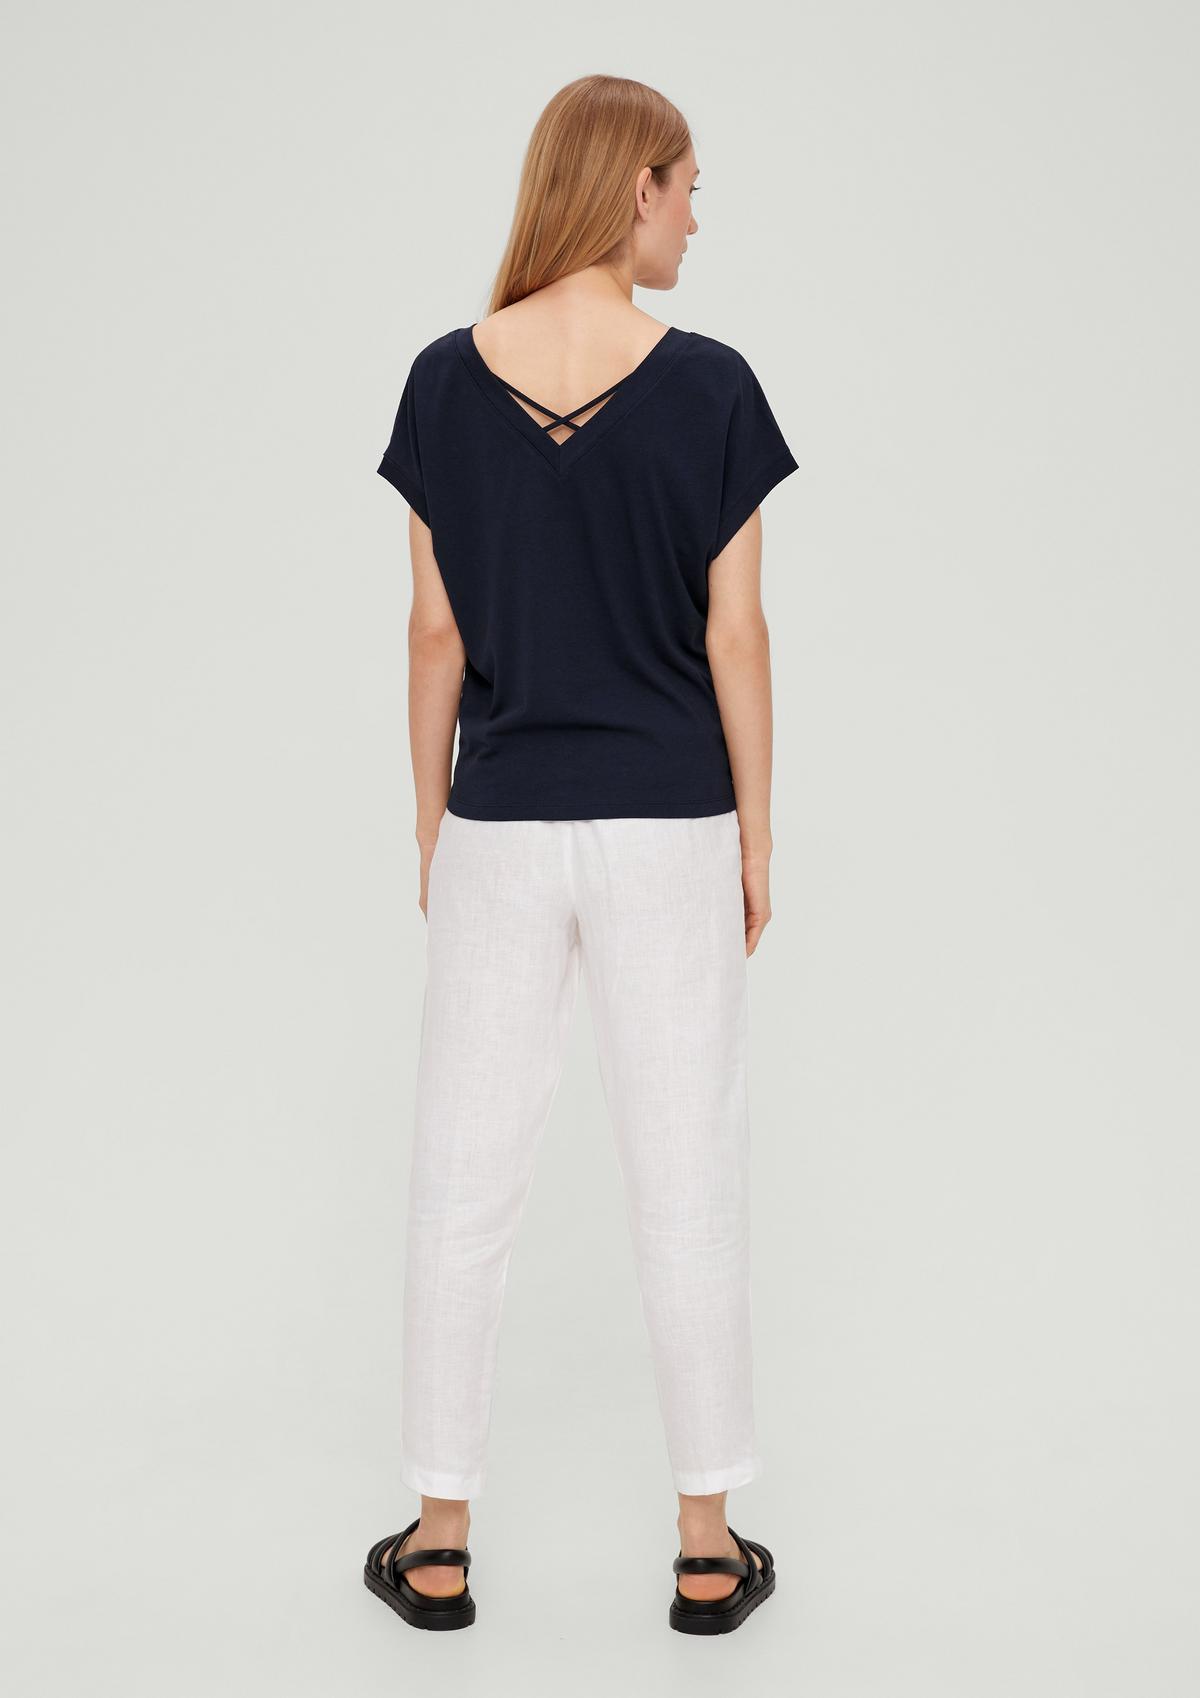 s.Oliver T-shirt with a back detail